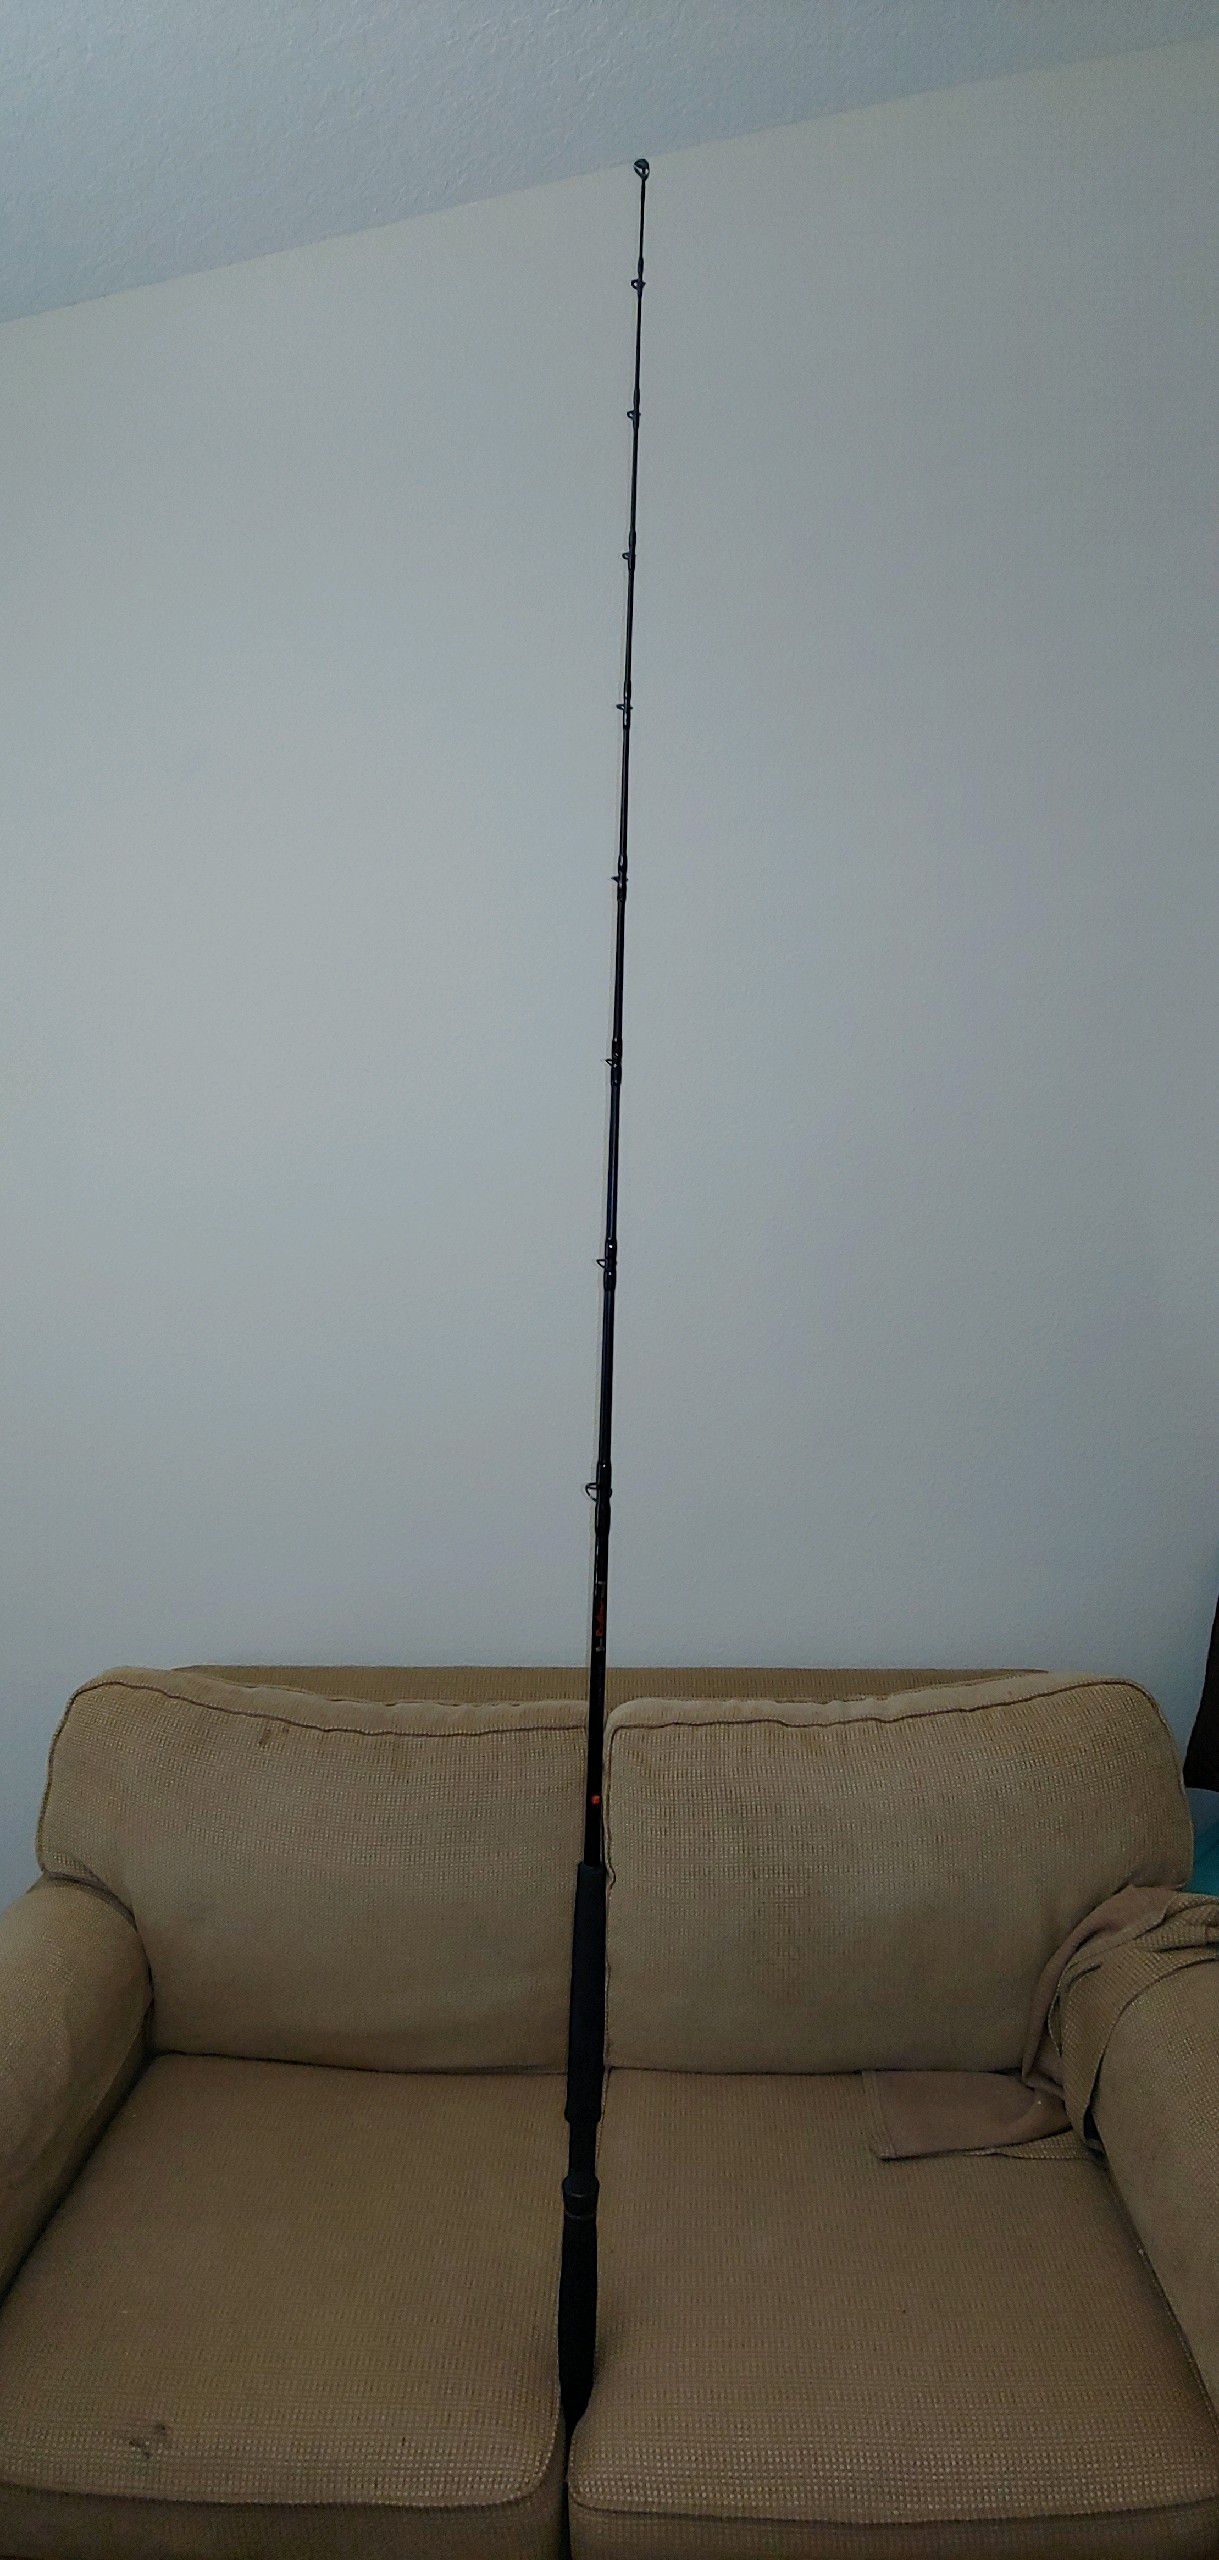 Offshore Fishing Rod for Sale in Ruskin, FL - OfferUp